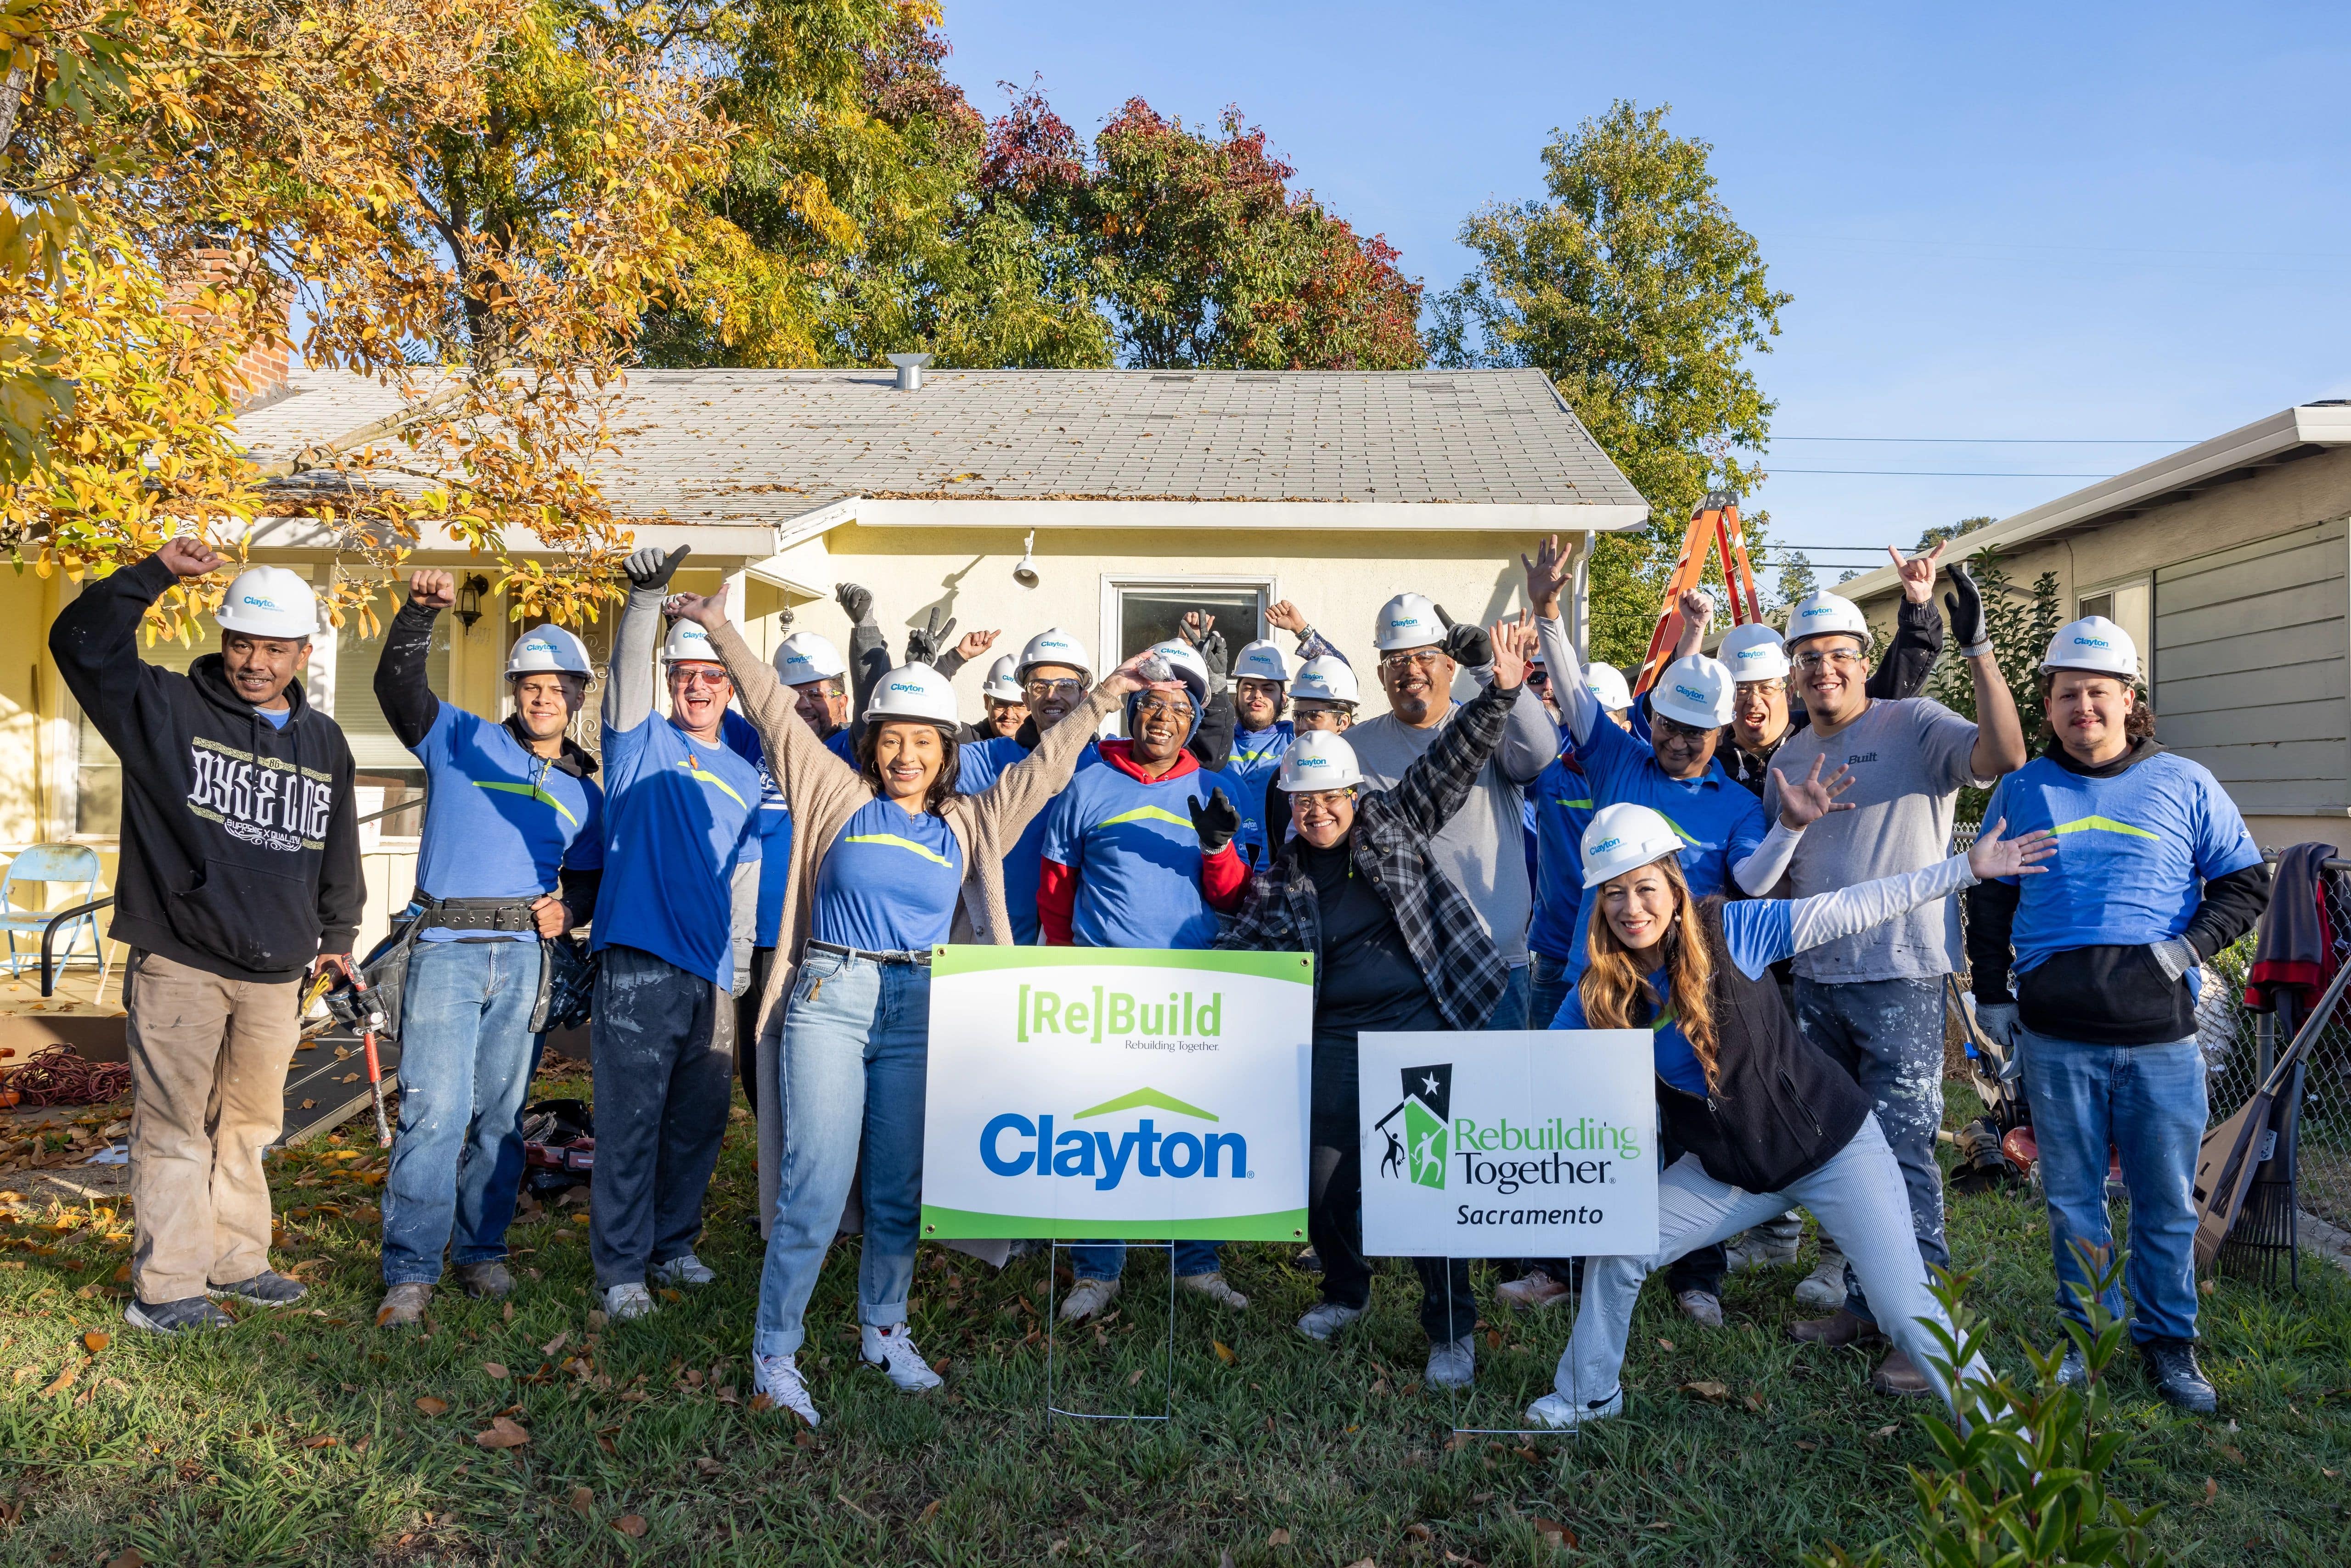 Clayton and Rebuilding Together partnered to help community neighbors remain in their homes by completing home repairs and renovations.